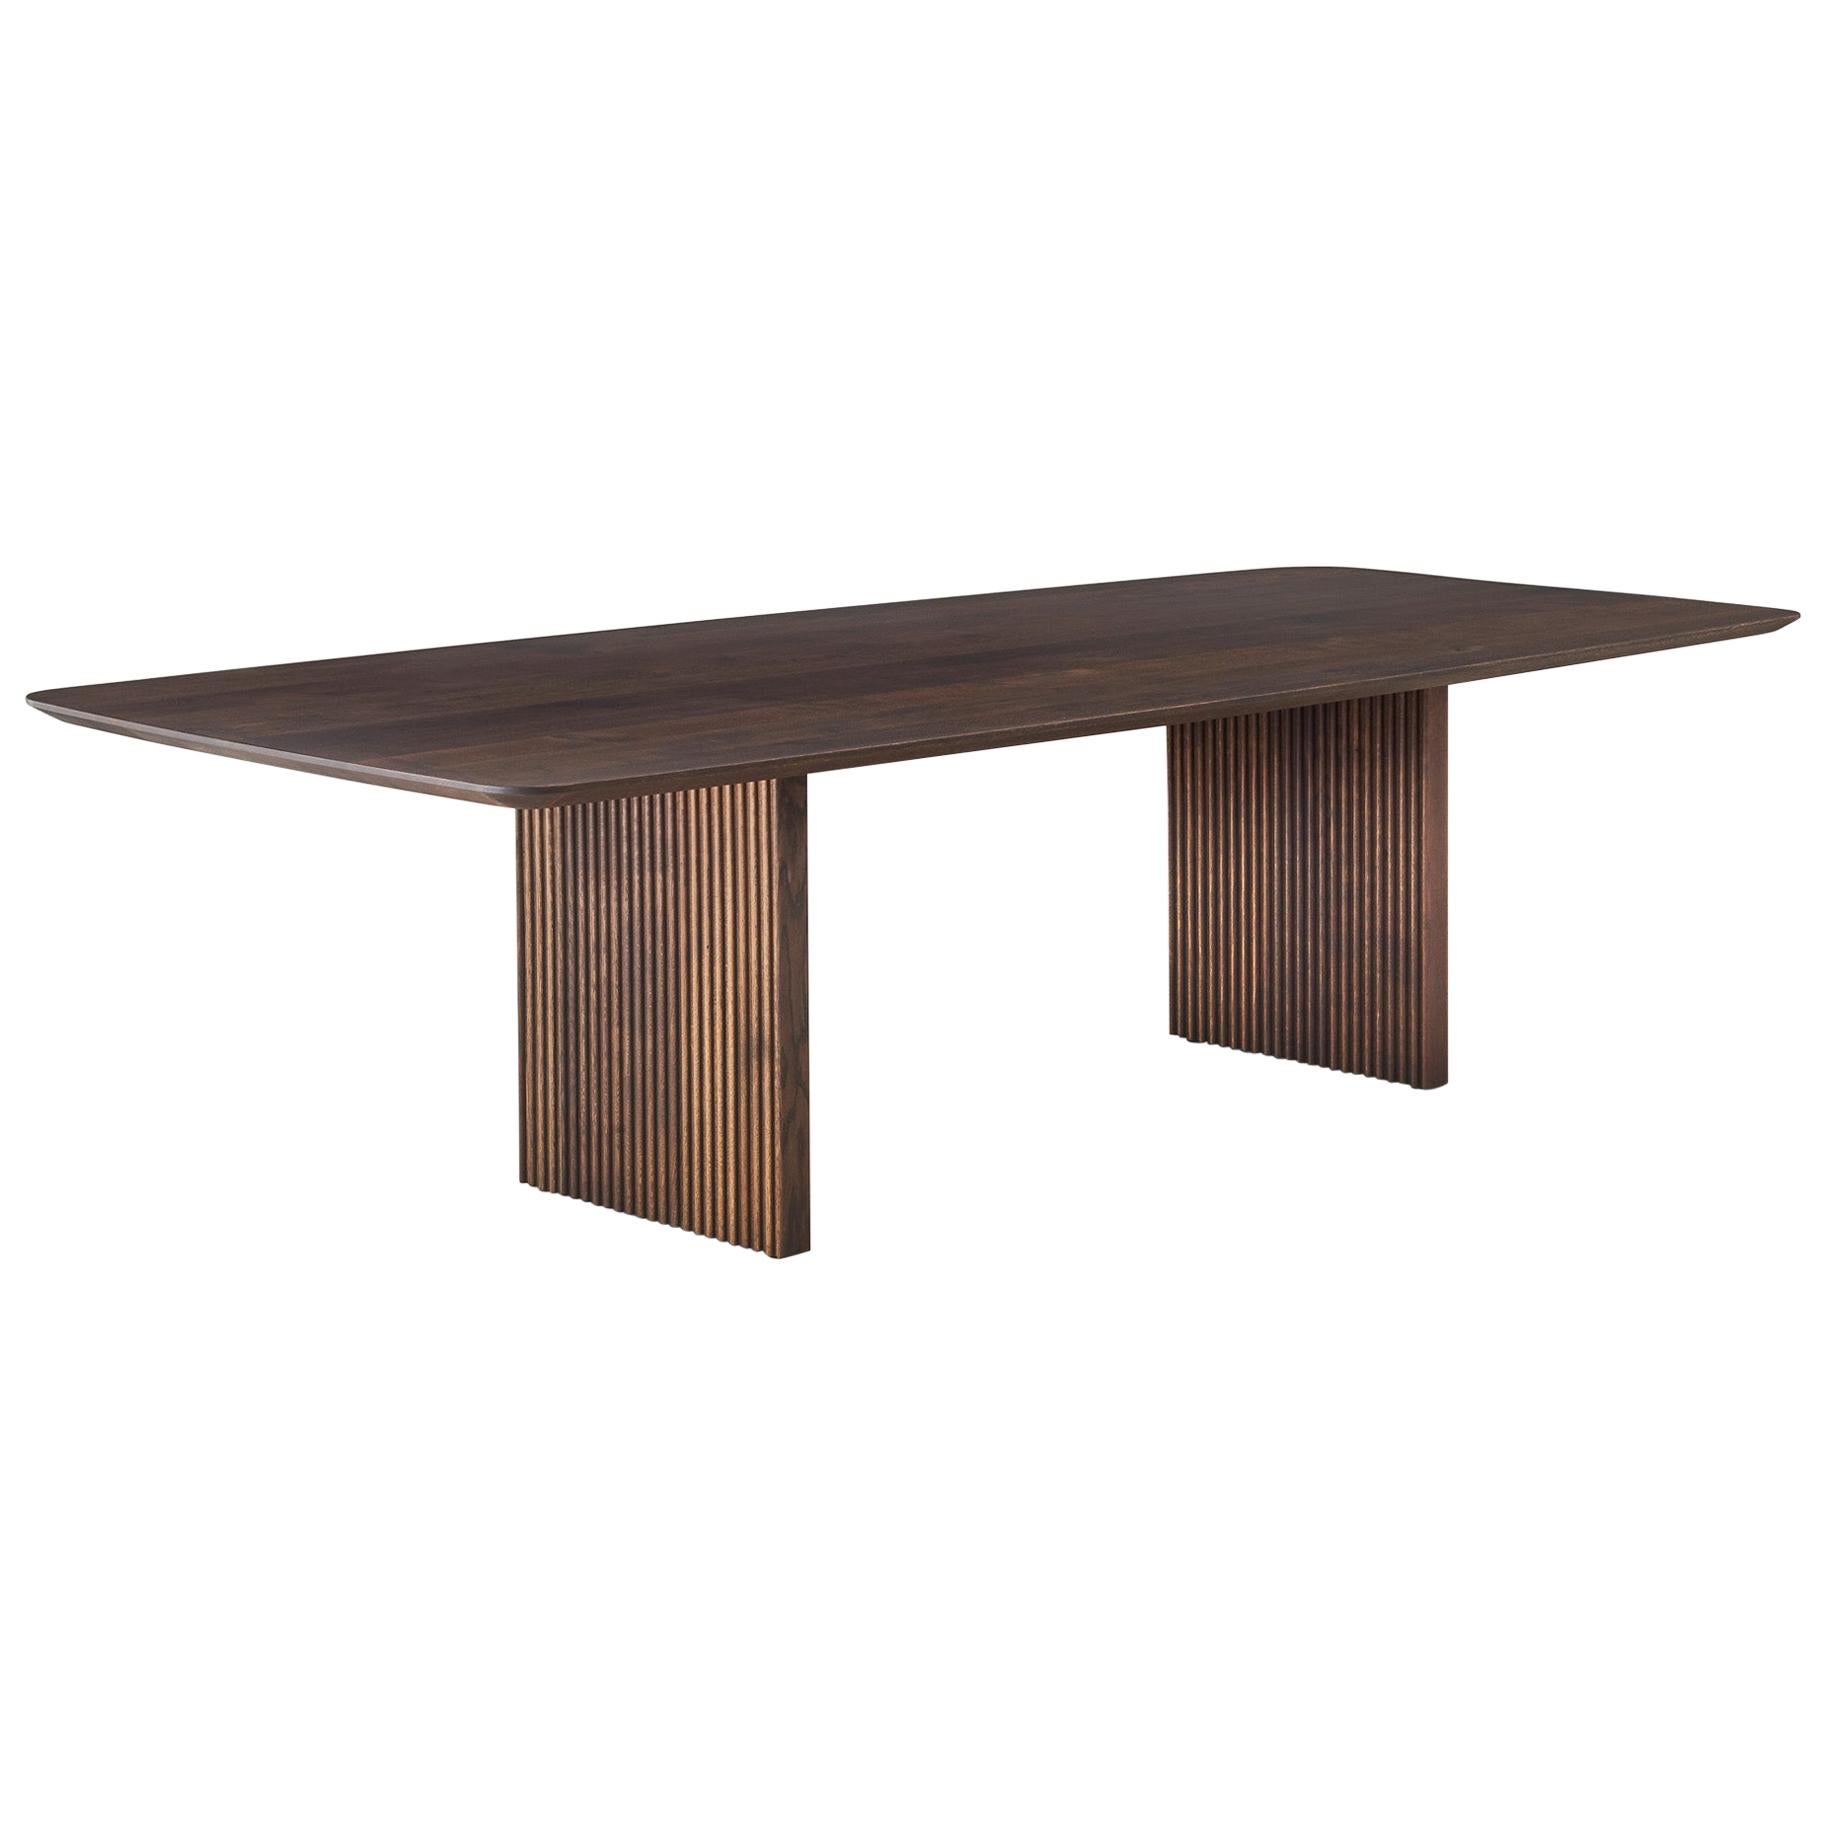 Customizable Dining Table TEN 300, Smoked Oak or Walnut For Sale at 1stDibs